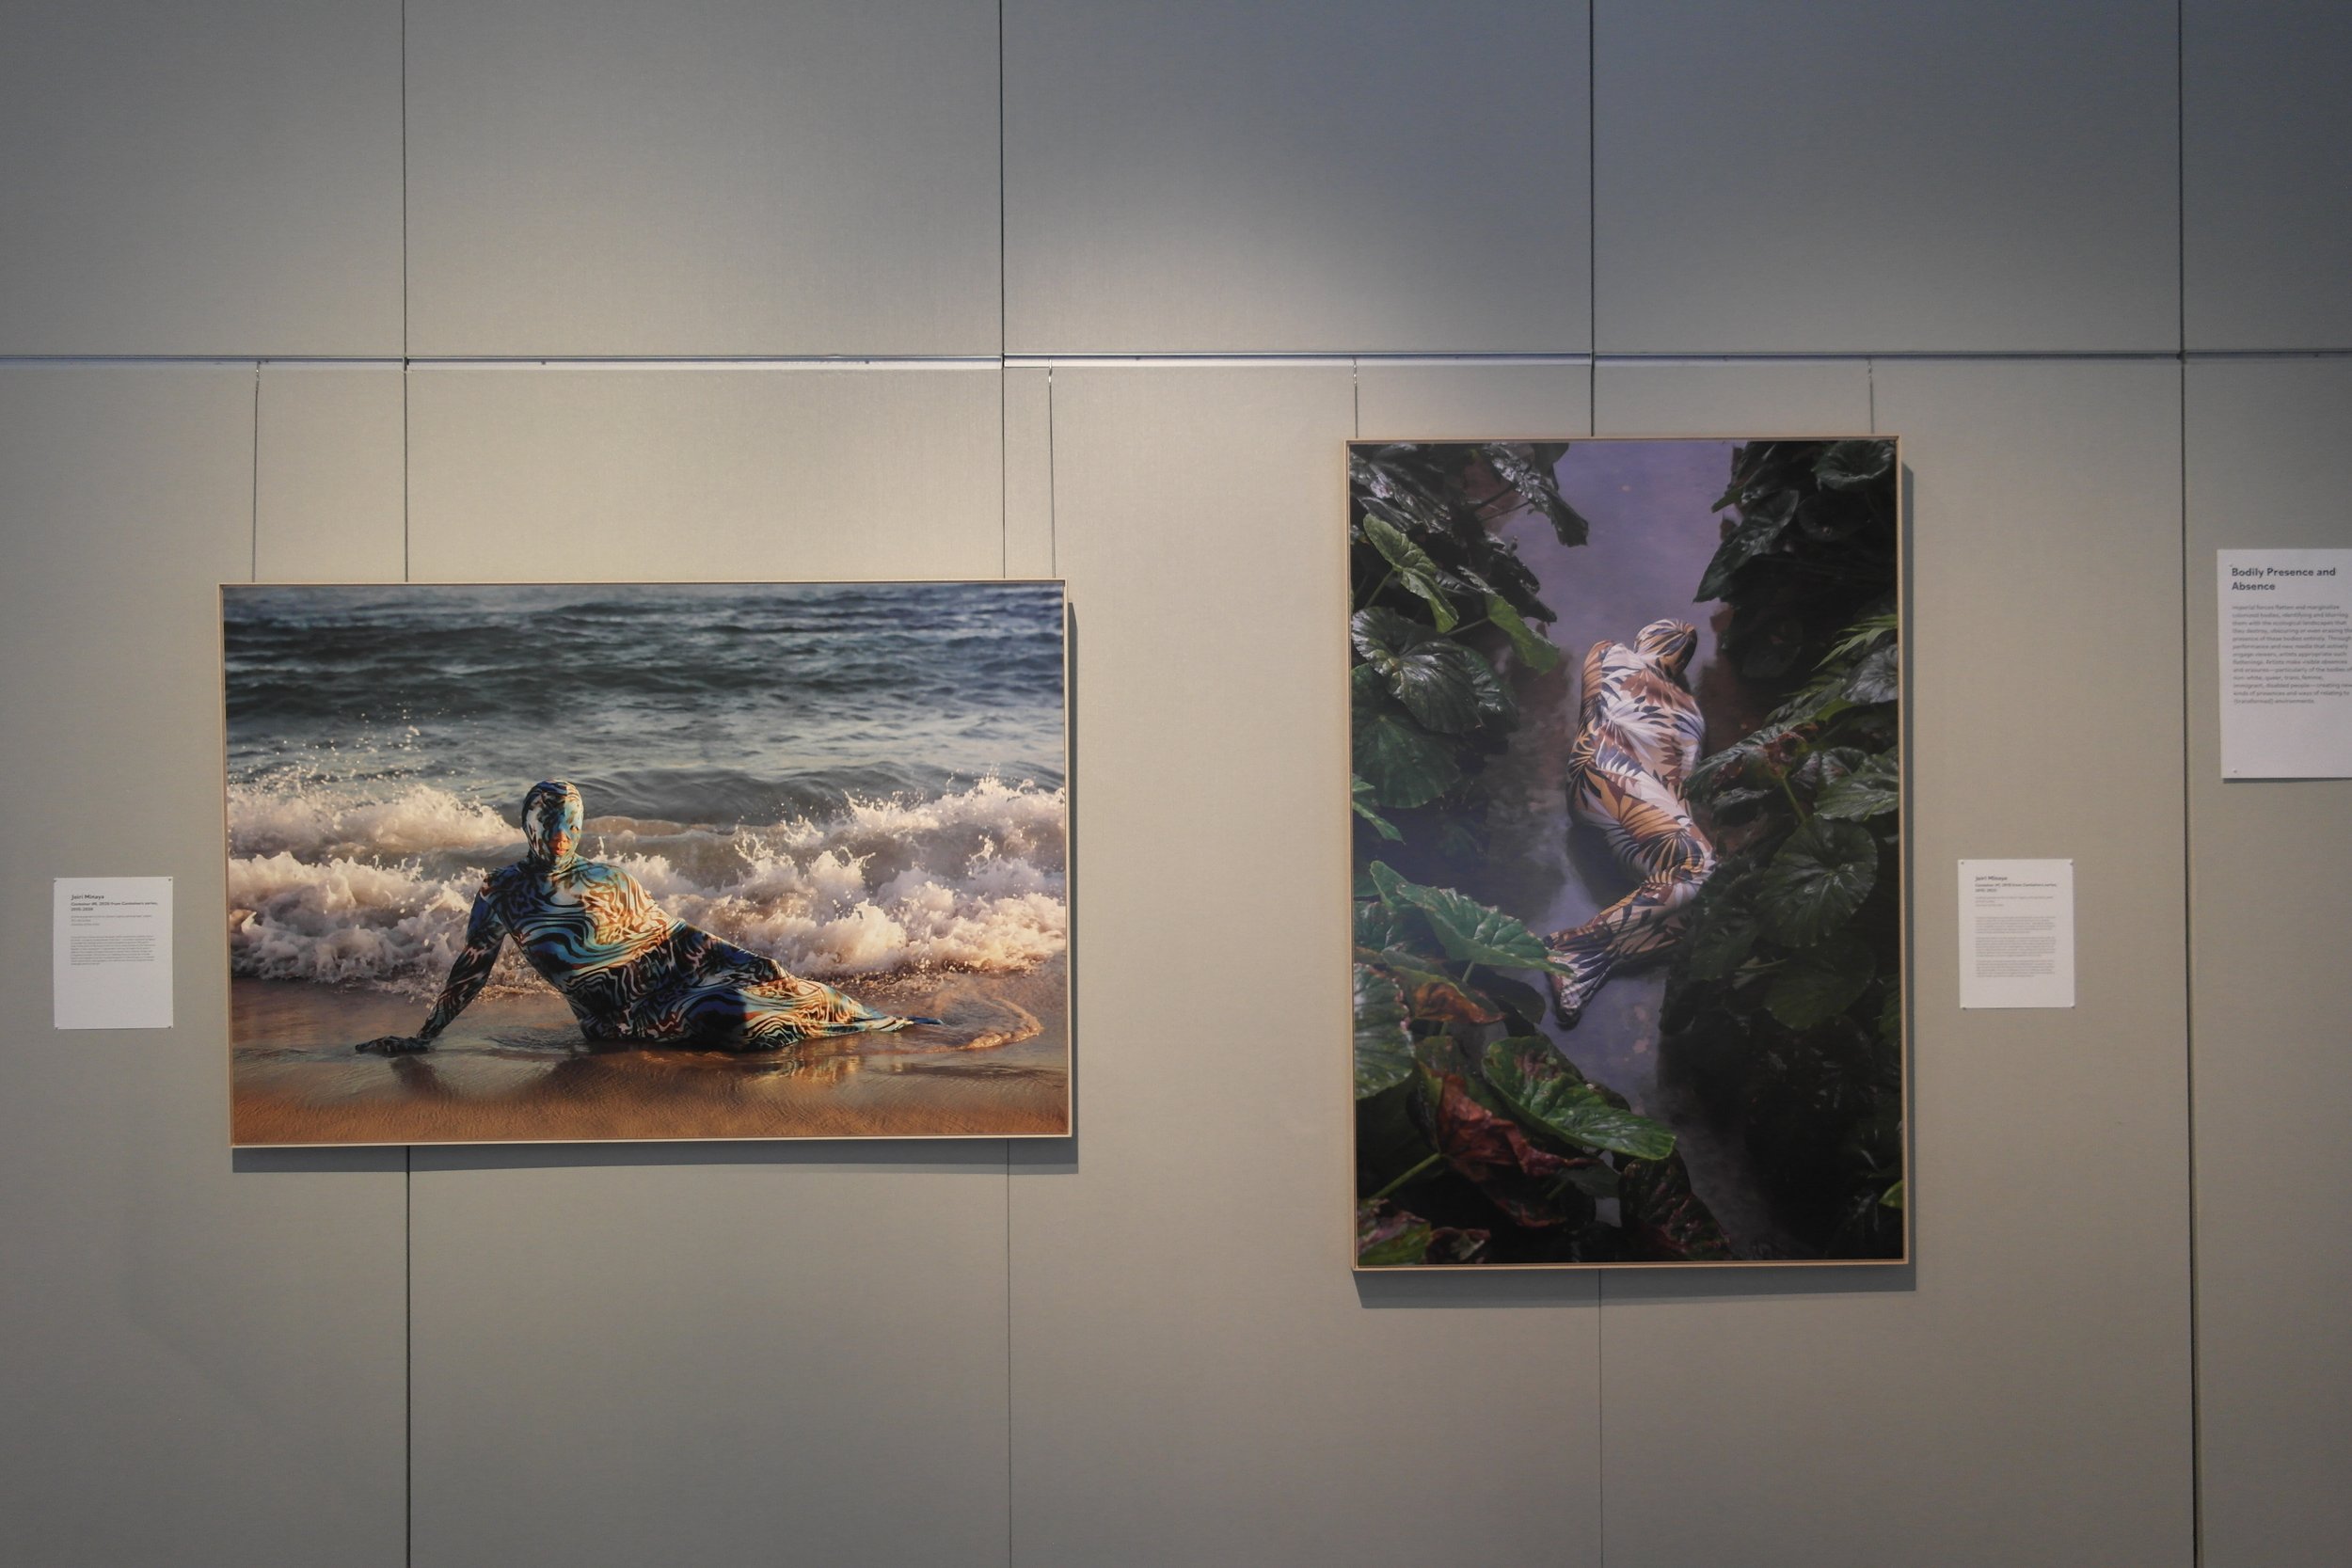 Gallery view with works by Joiri Minaya (left to right): Container #6 (2020) and Container #1 (2015), archival pigment prints on Epson Legacy photography paper, 40 x 60 inches. Courtesy of the artist.